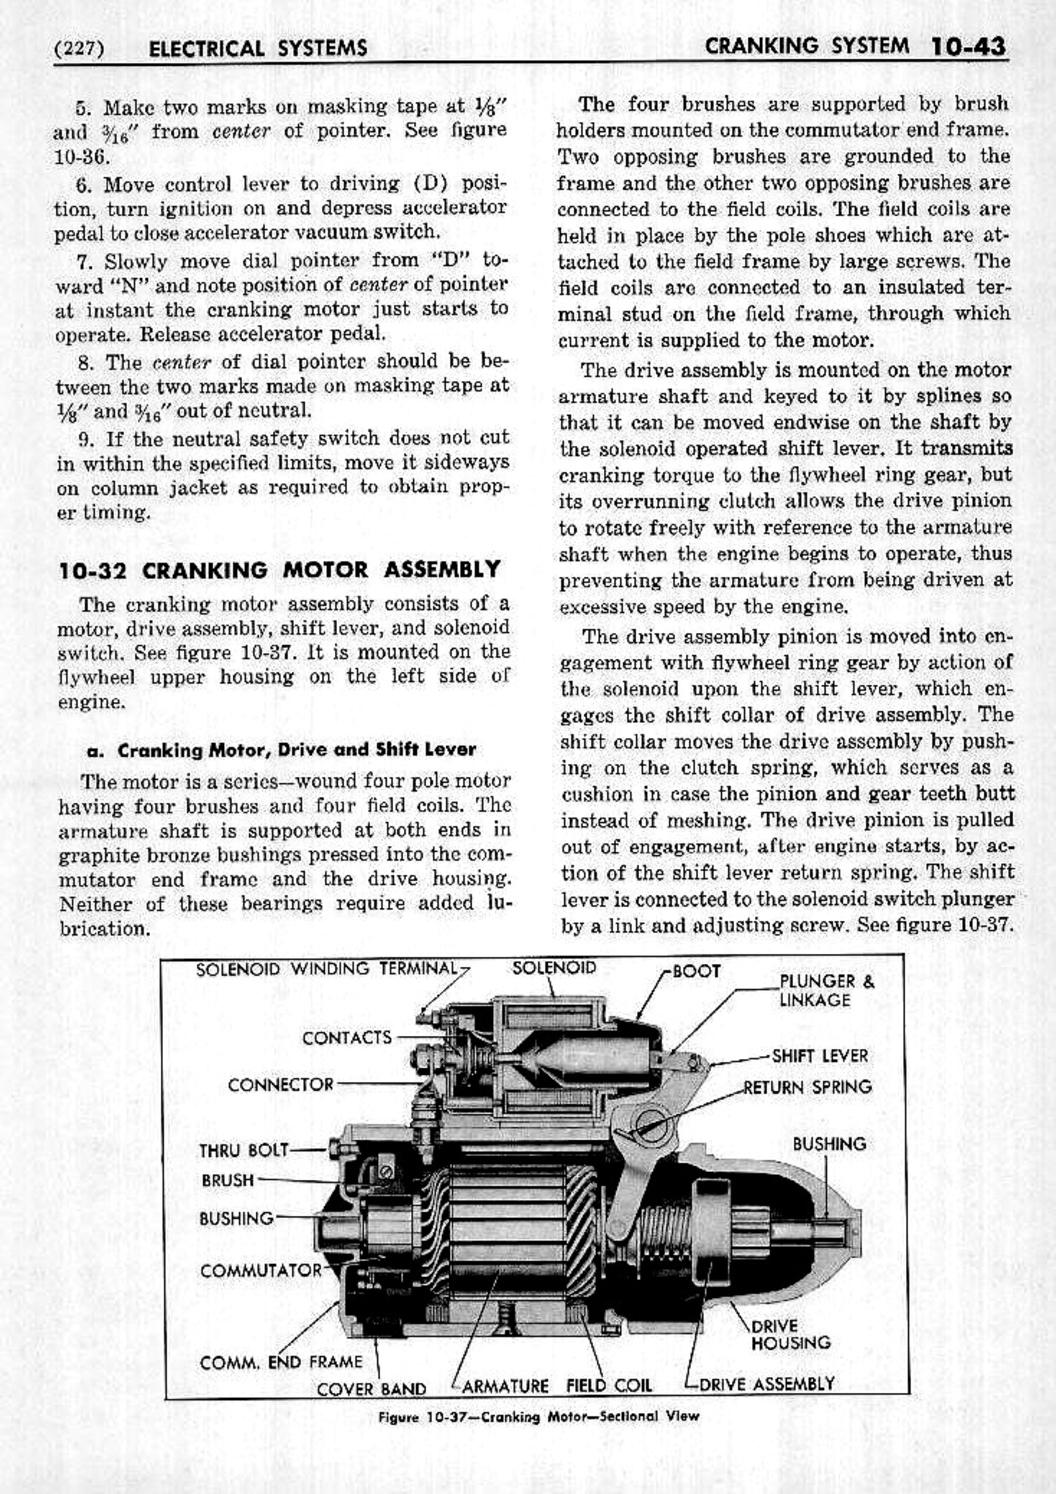 n_11 1953 Buick Shop Manual - Electrical Systems-043-043.jpg